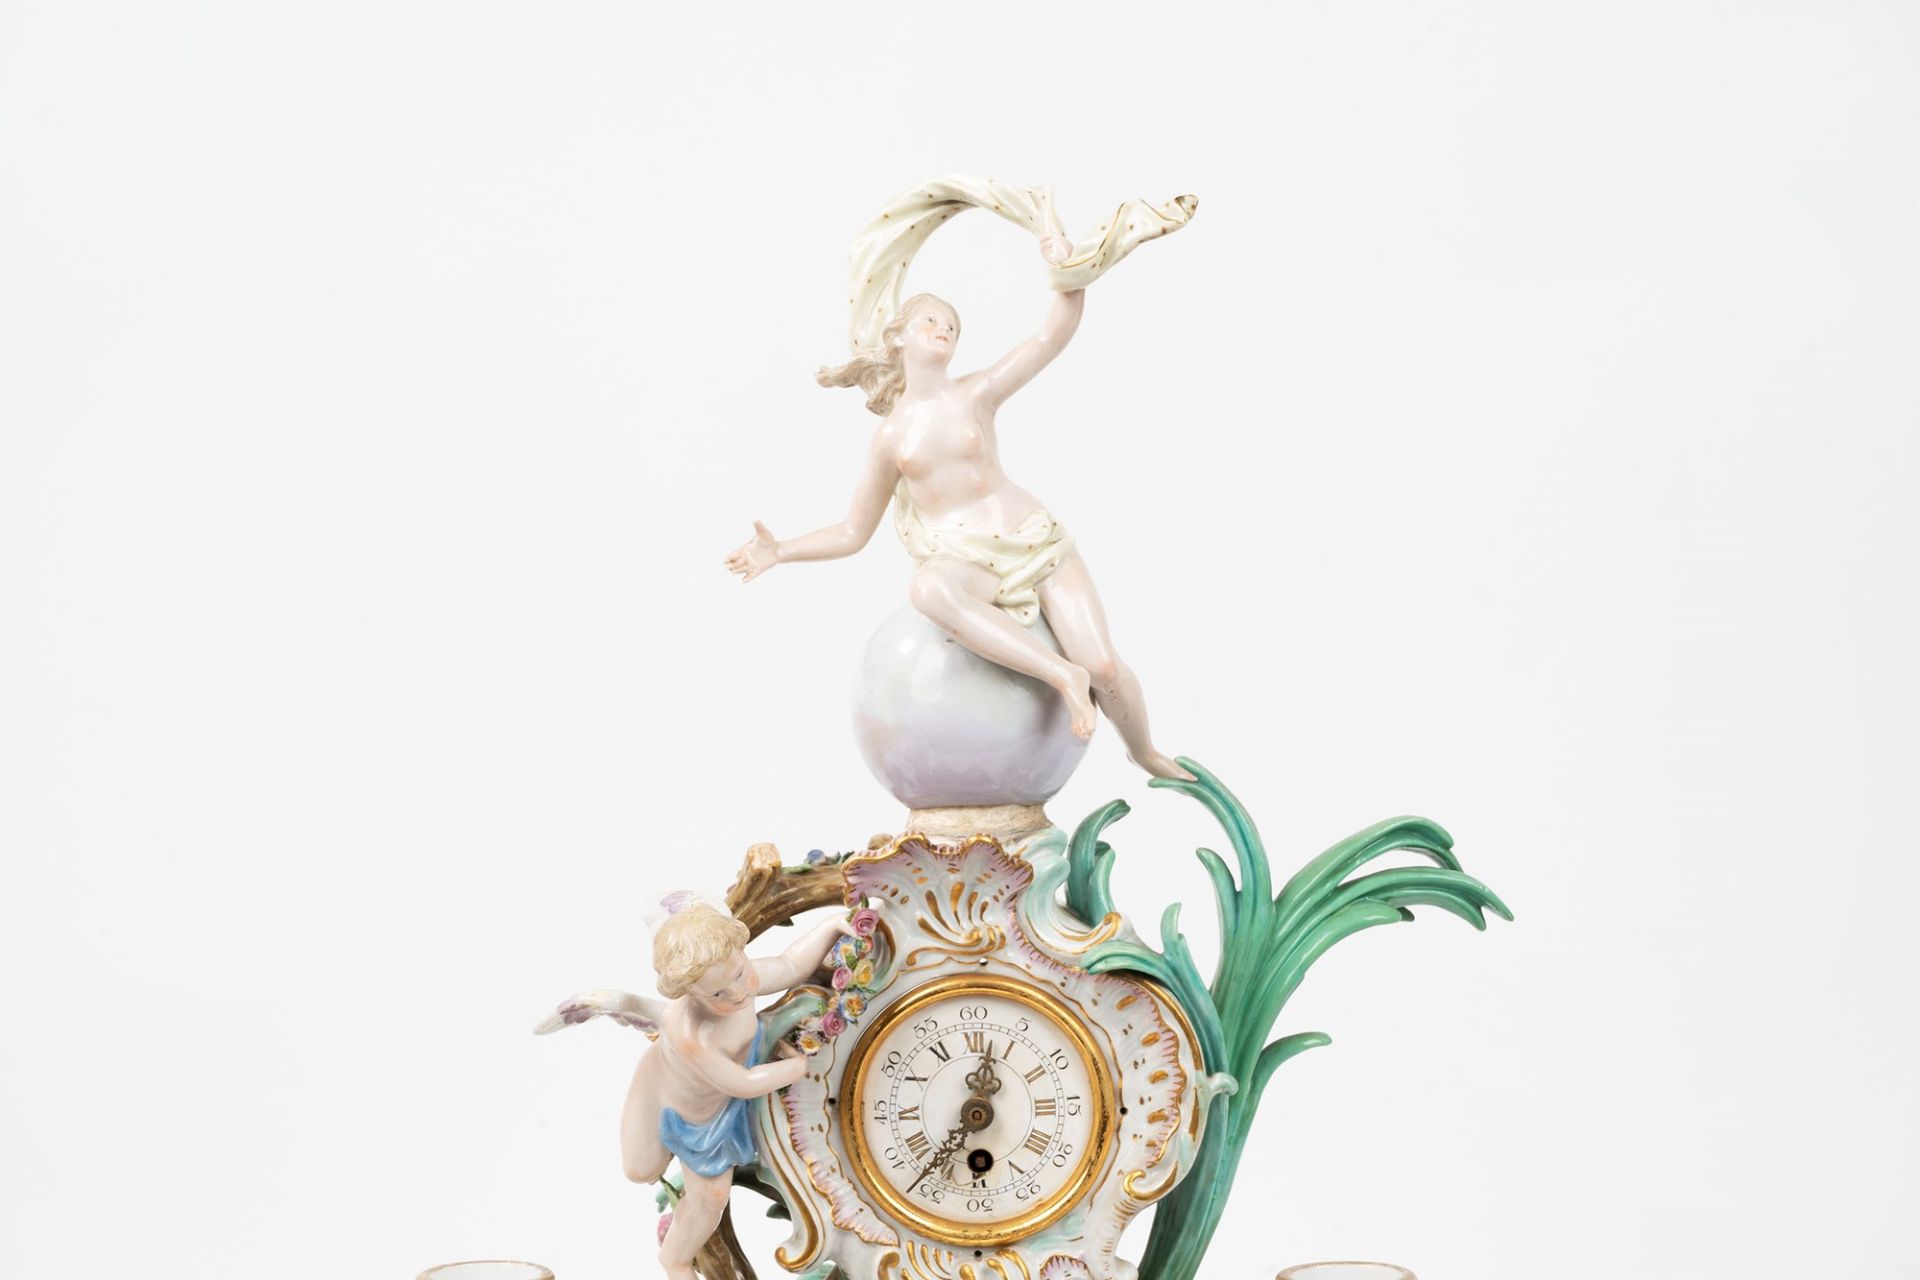 Polychrome porcelain table clock depicting the Truth revealed by Time, Meissen manufacture, 19th cen - Image 5 of 7